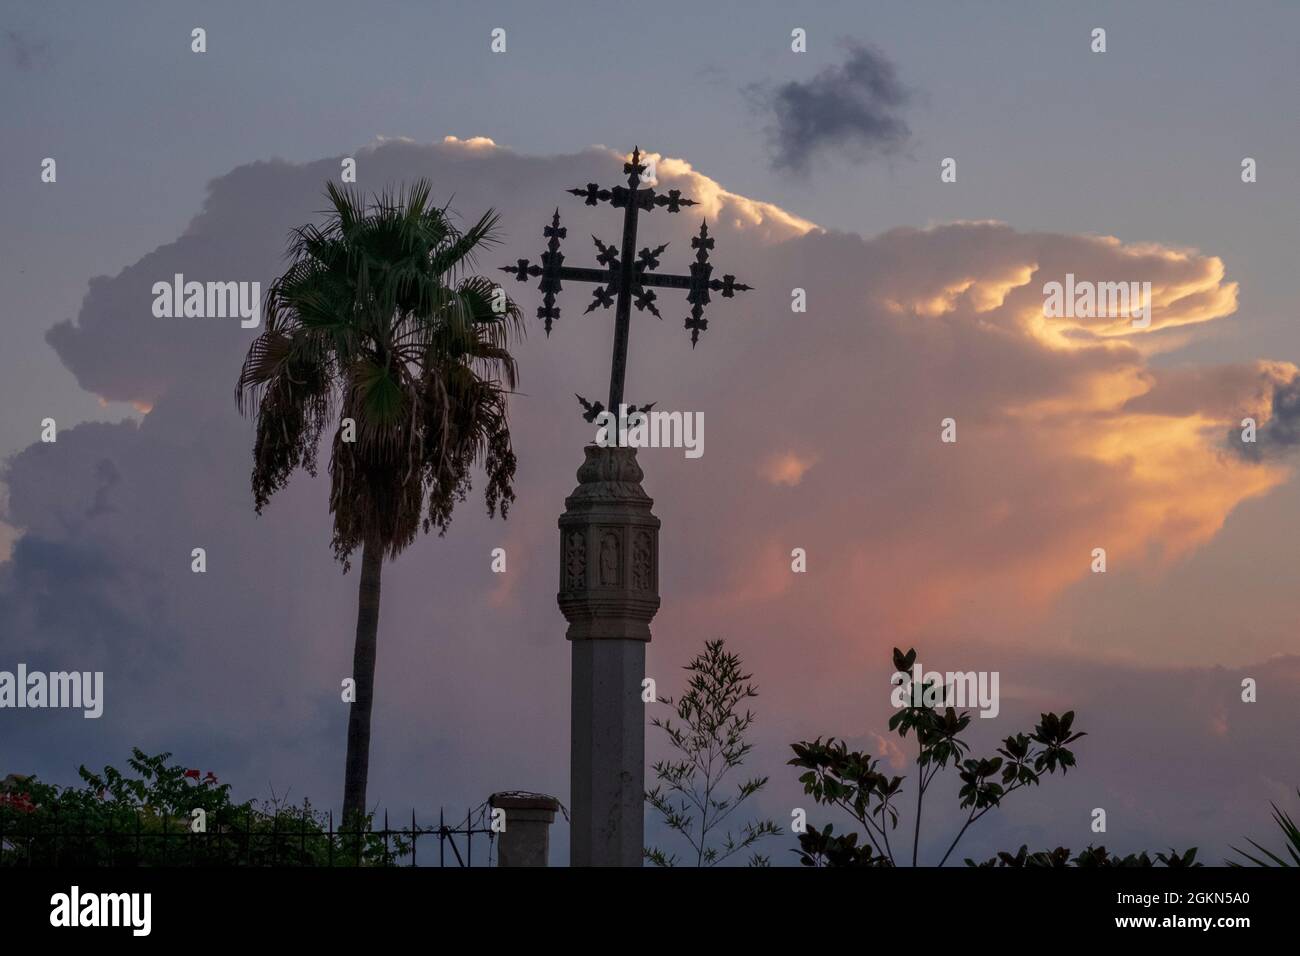 Cross and palm tree against a storm cloud in the morning sky, Selva, Mallorca, Spain Stock Photo